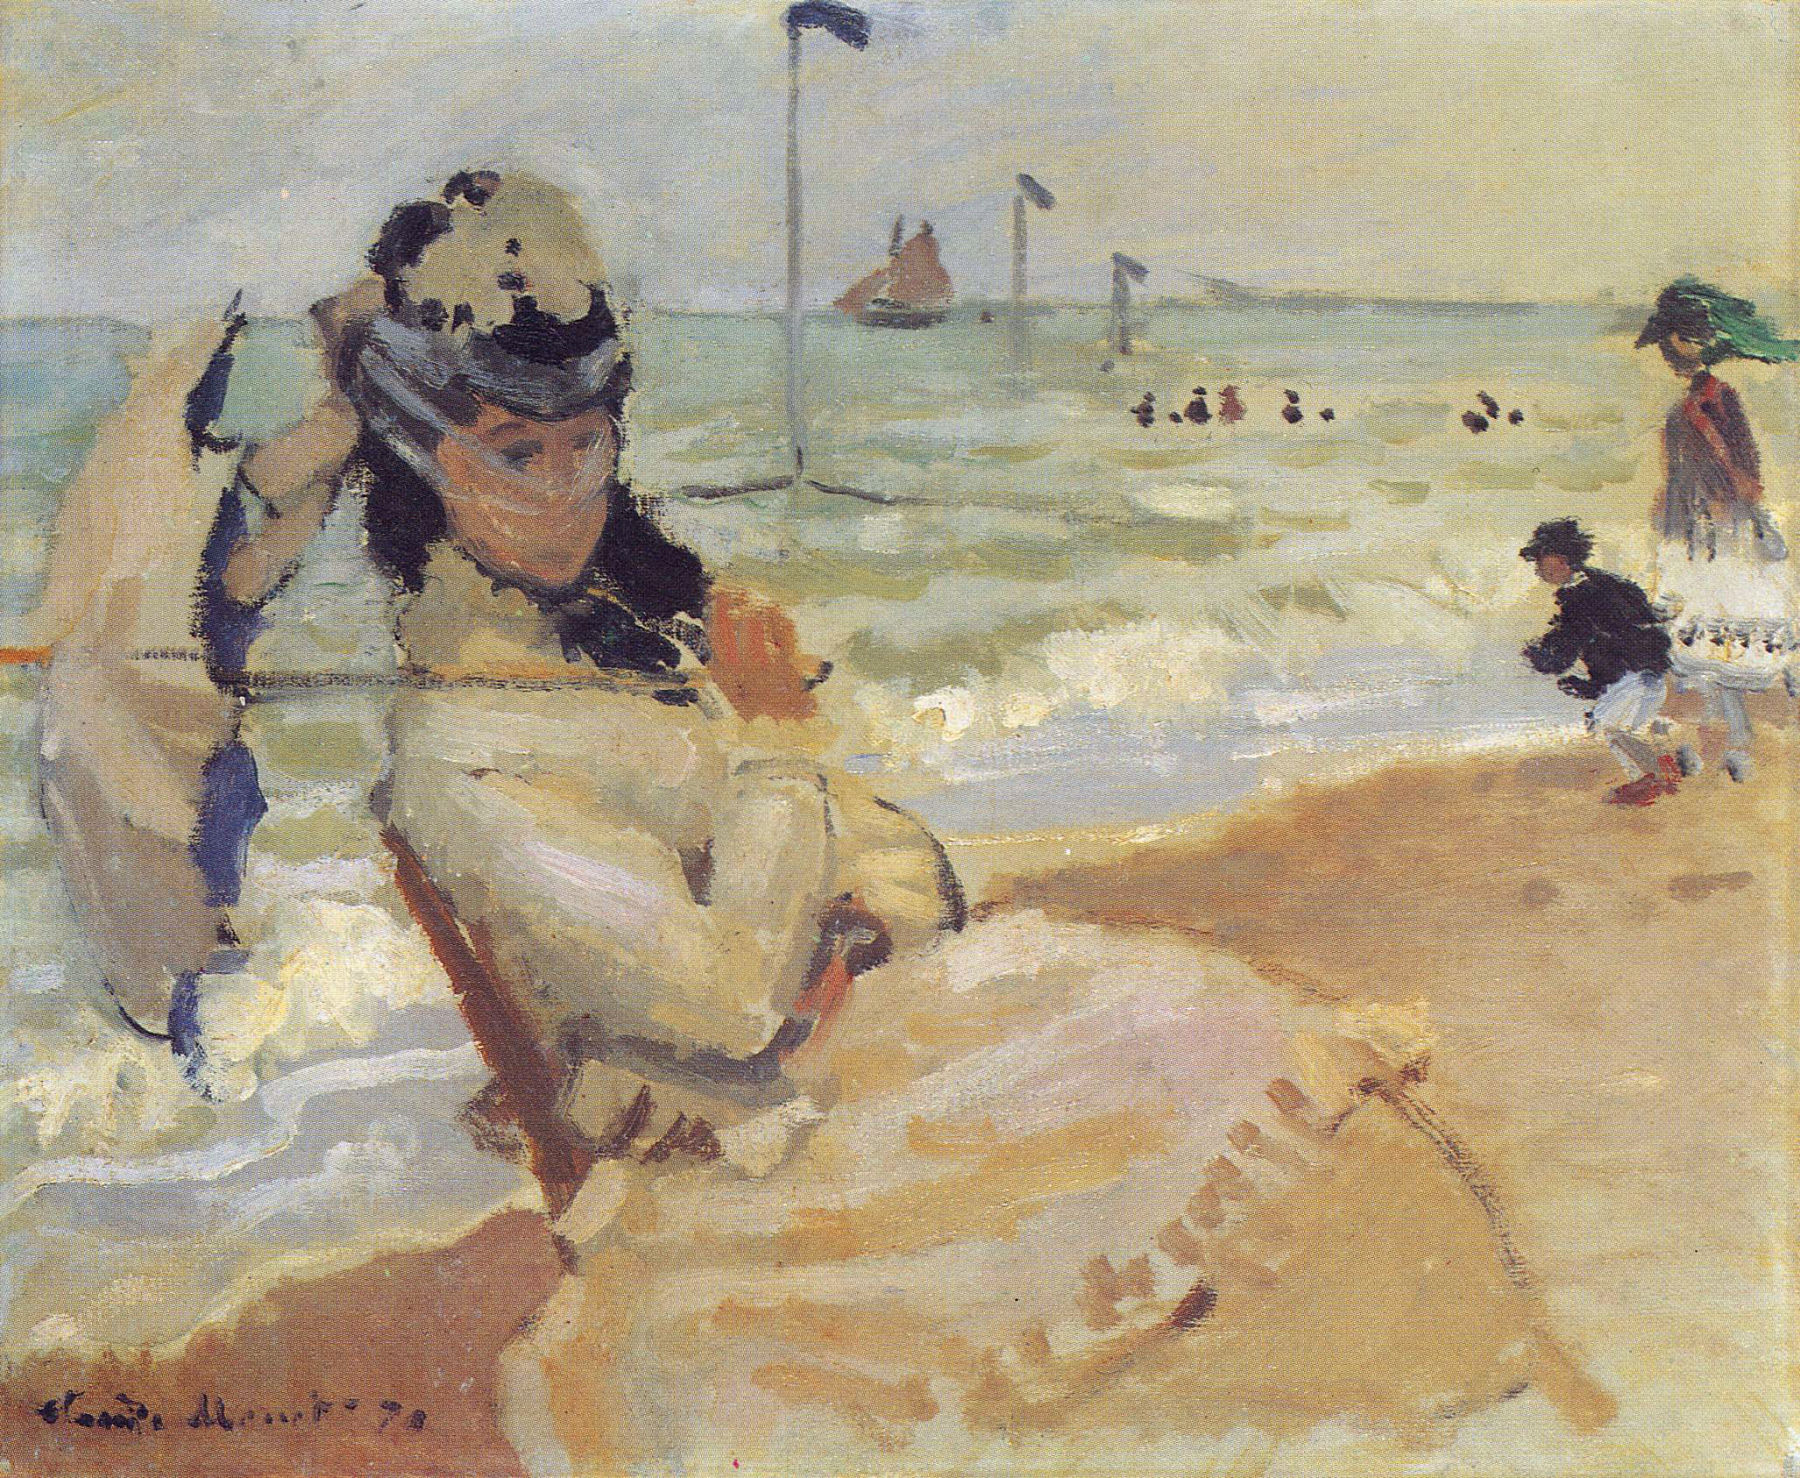 Camille on the Beach Near Trouville by Claude Monet - 1870 - 38.1 x 46.4 cm Yale University Art Gallery